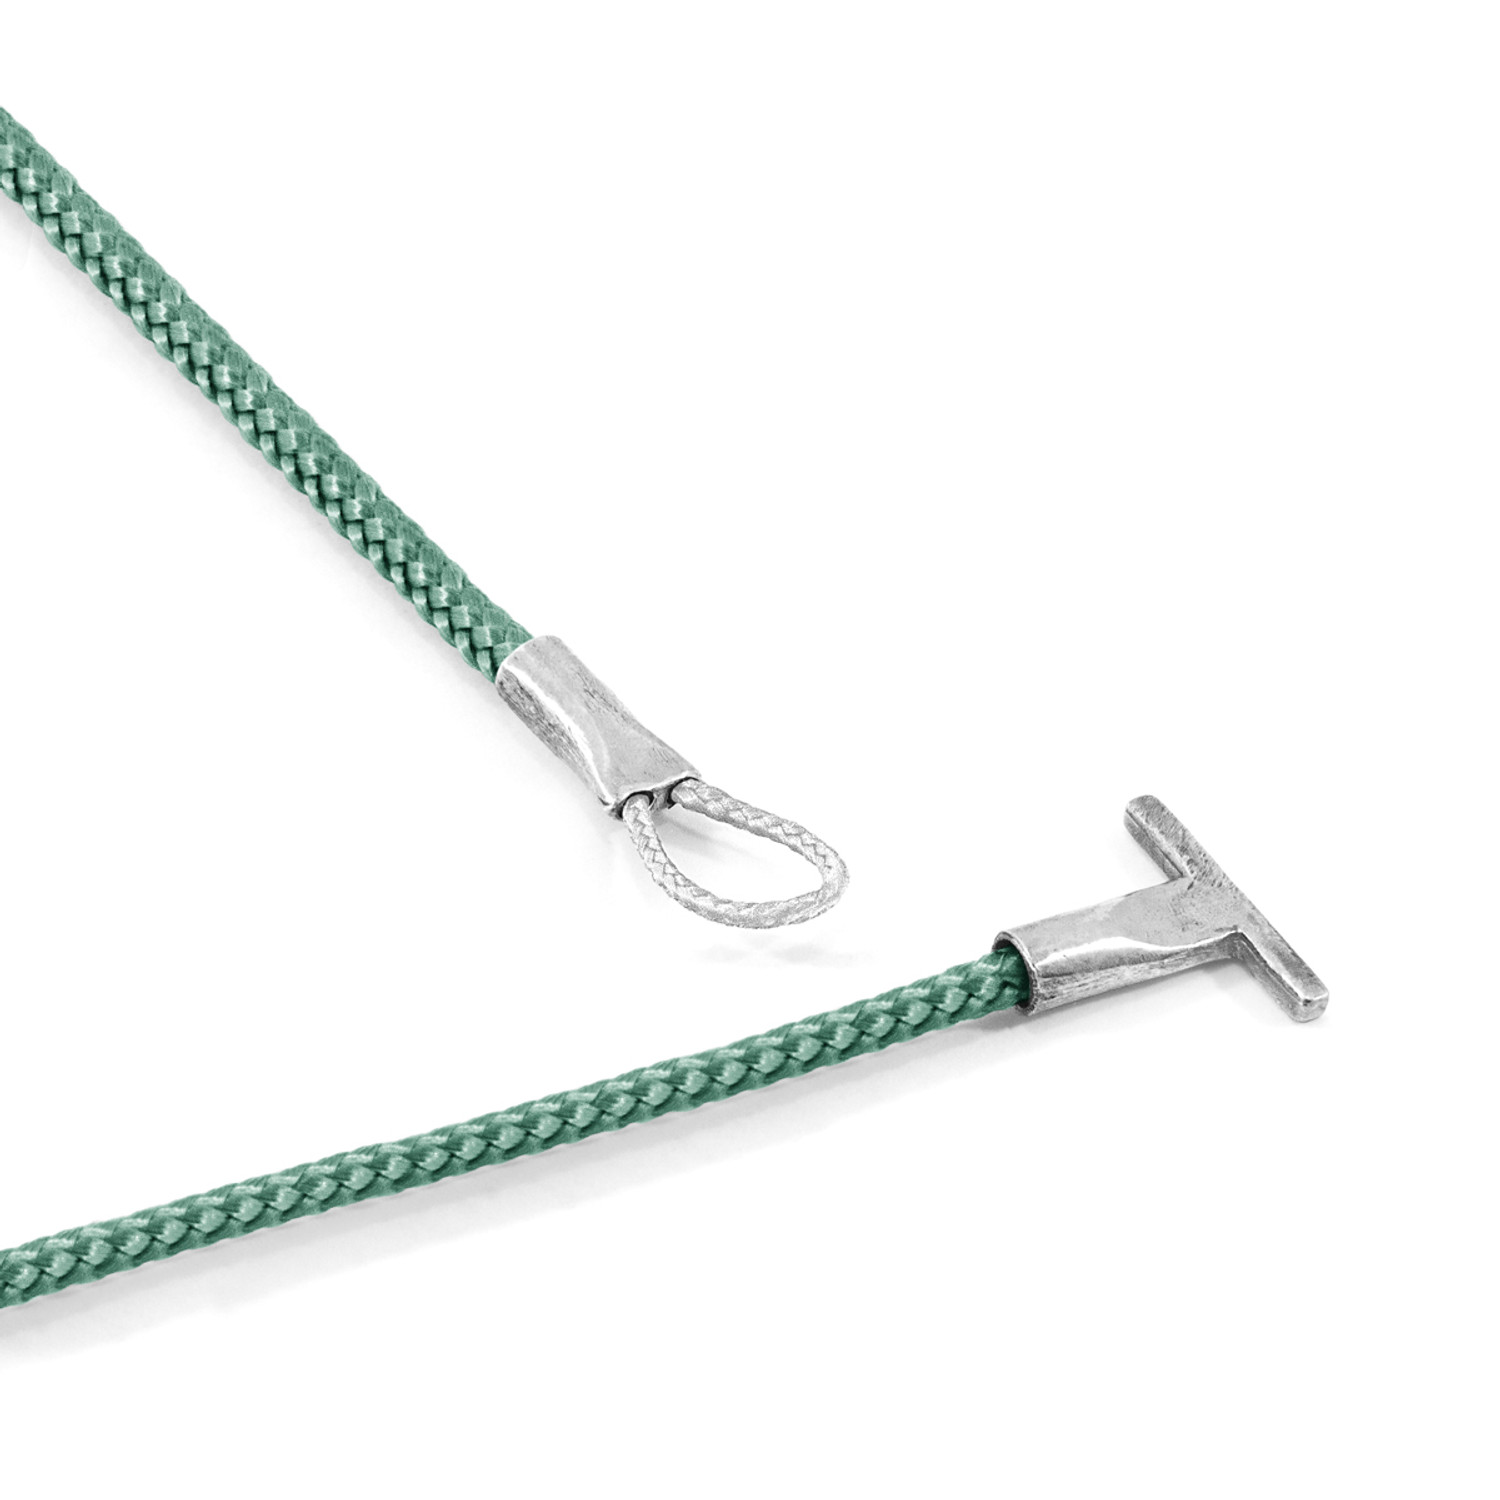 Anchor & Crew Mint Green Cambridge Silver and Rope Bracelet